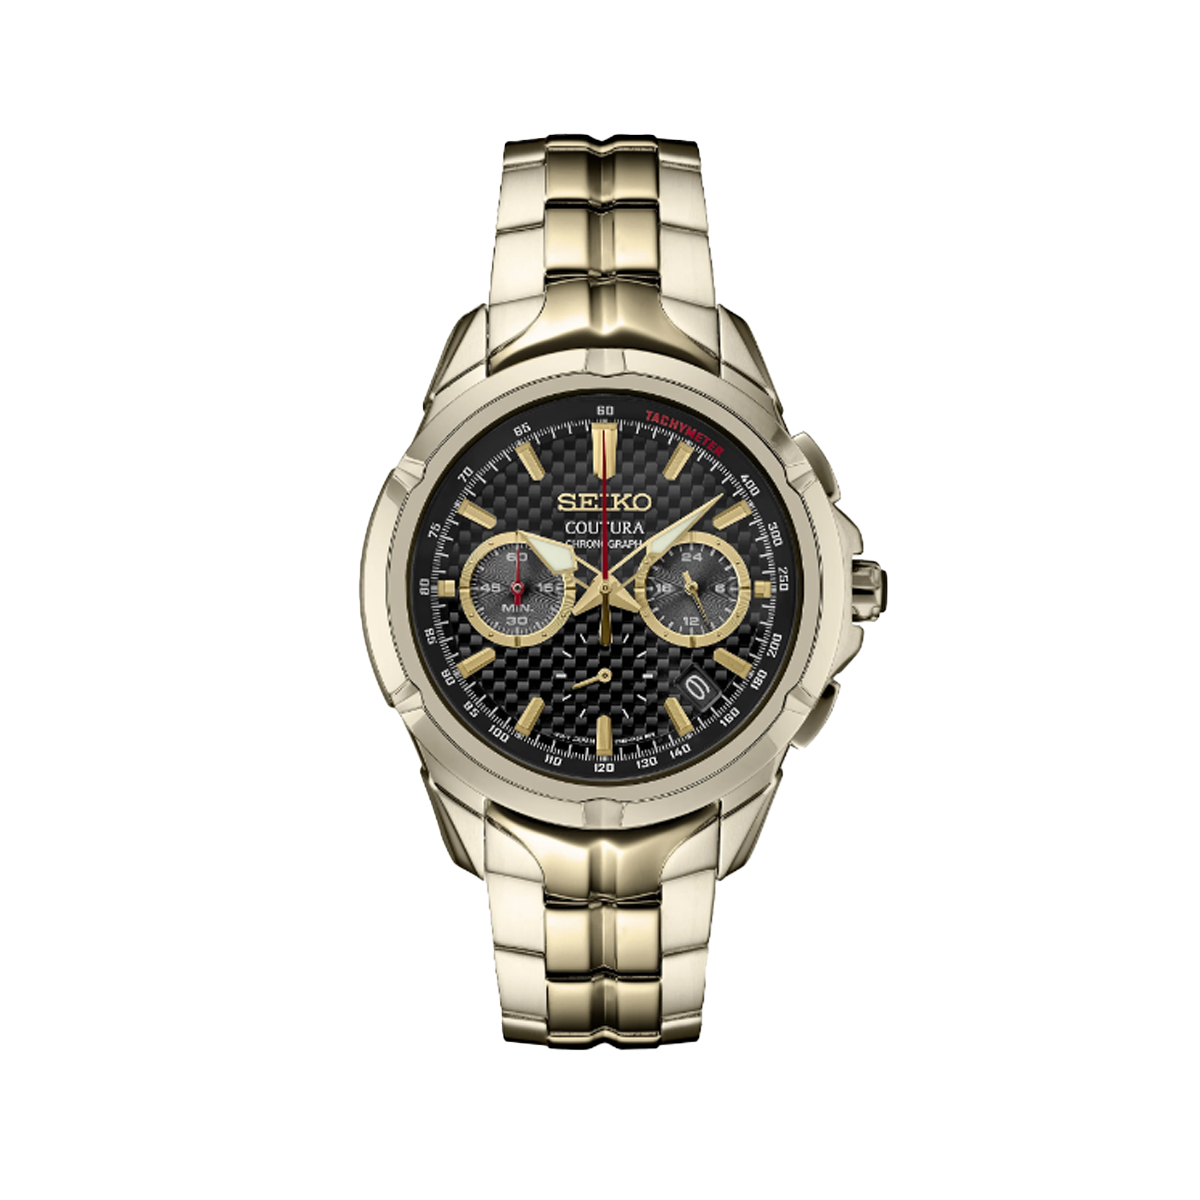 Stainless Steel Yellow Gold Plated Seiko Coutura Quartz Chronograph Watch